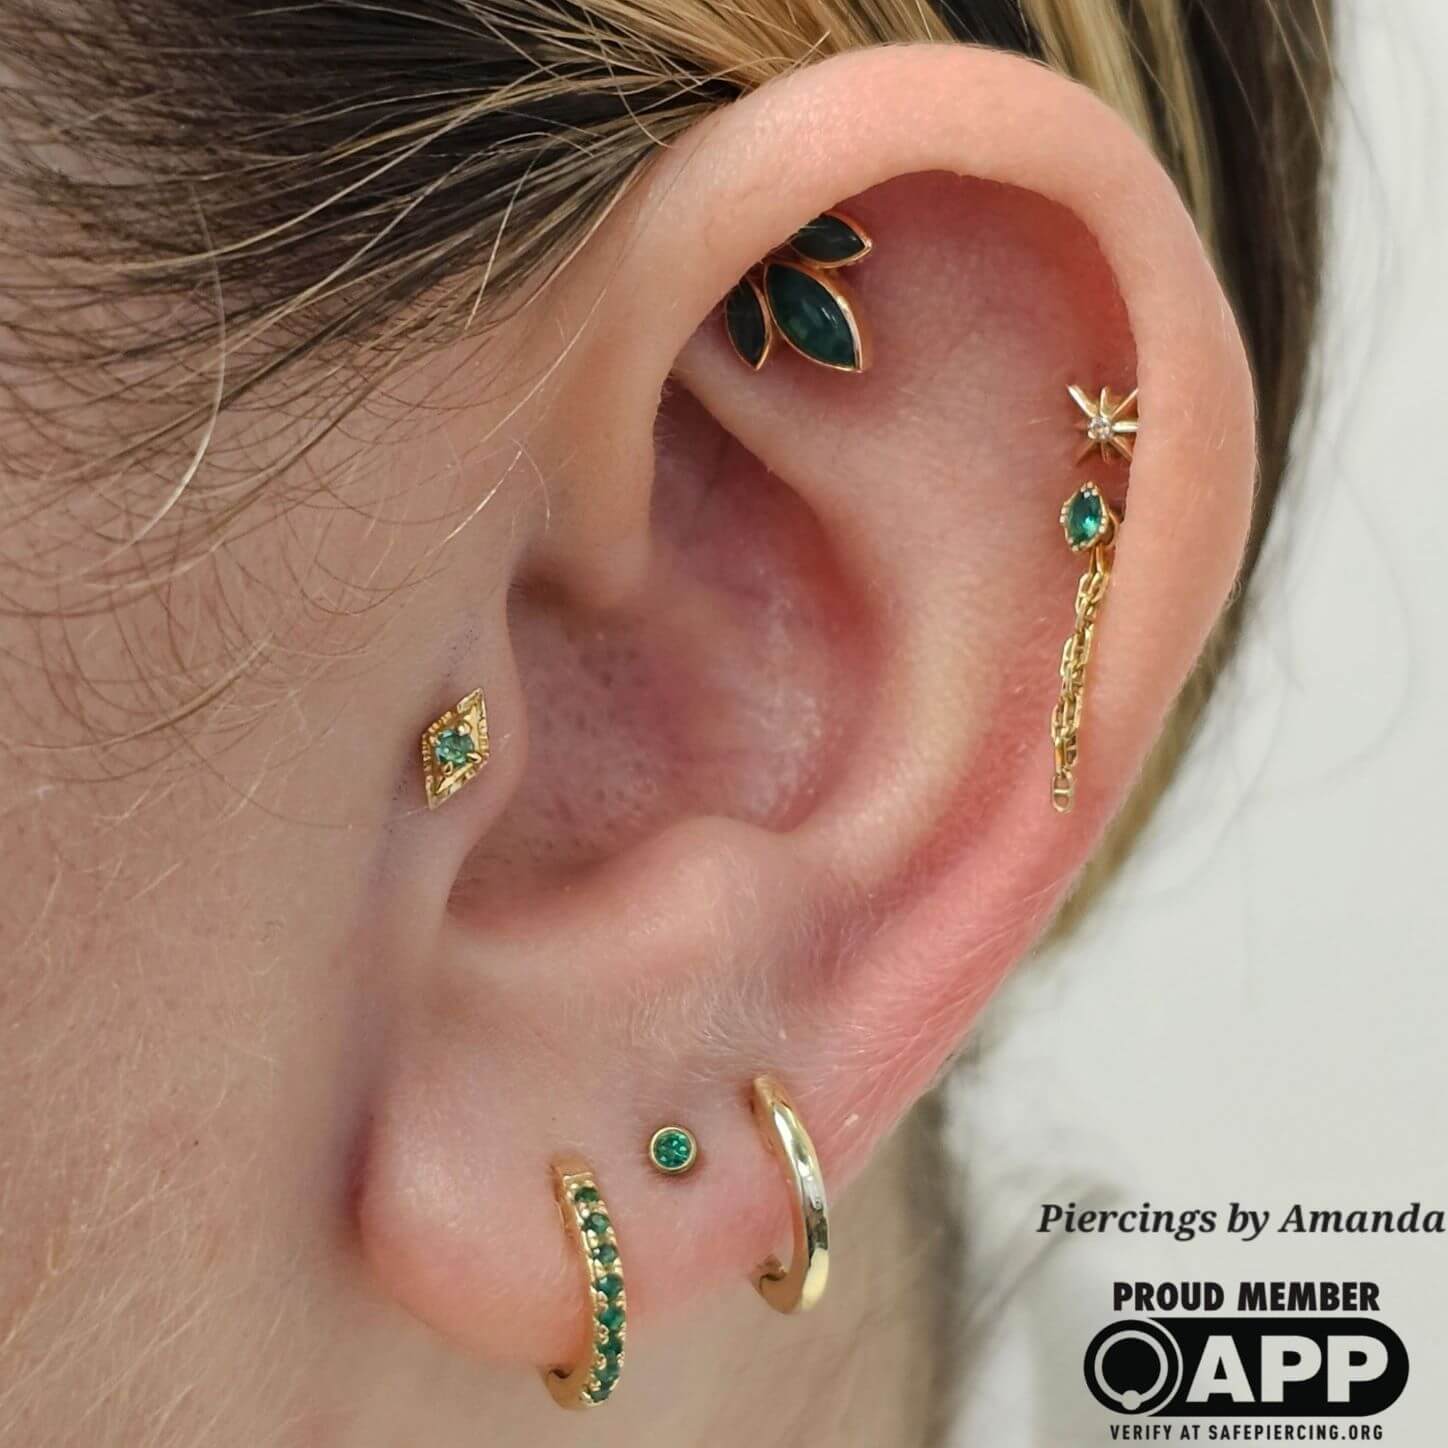 Ear curation with 14k and 18k yellow gold pieces